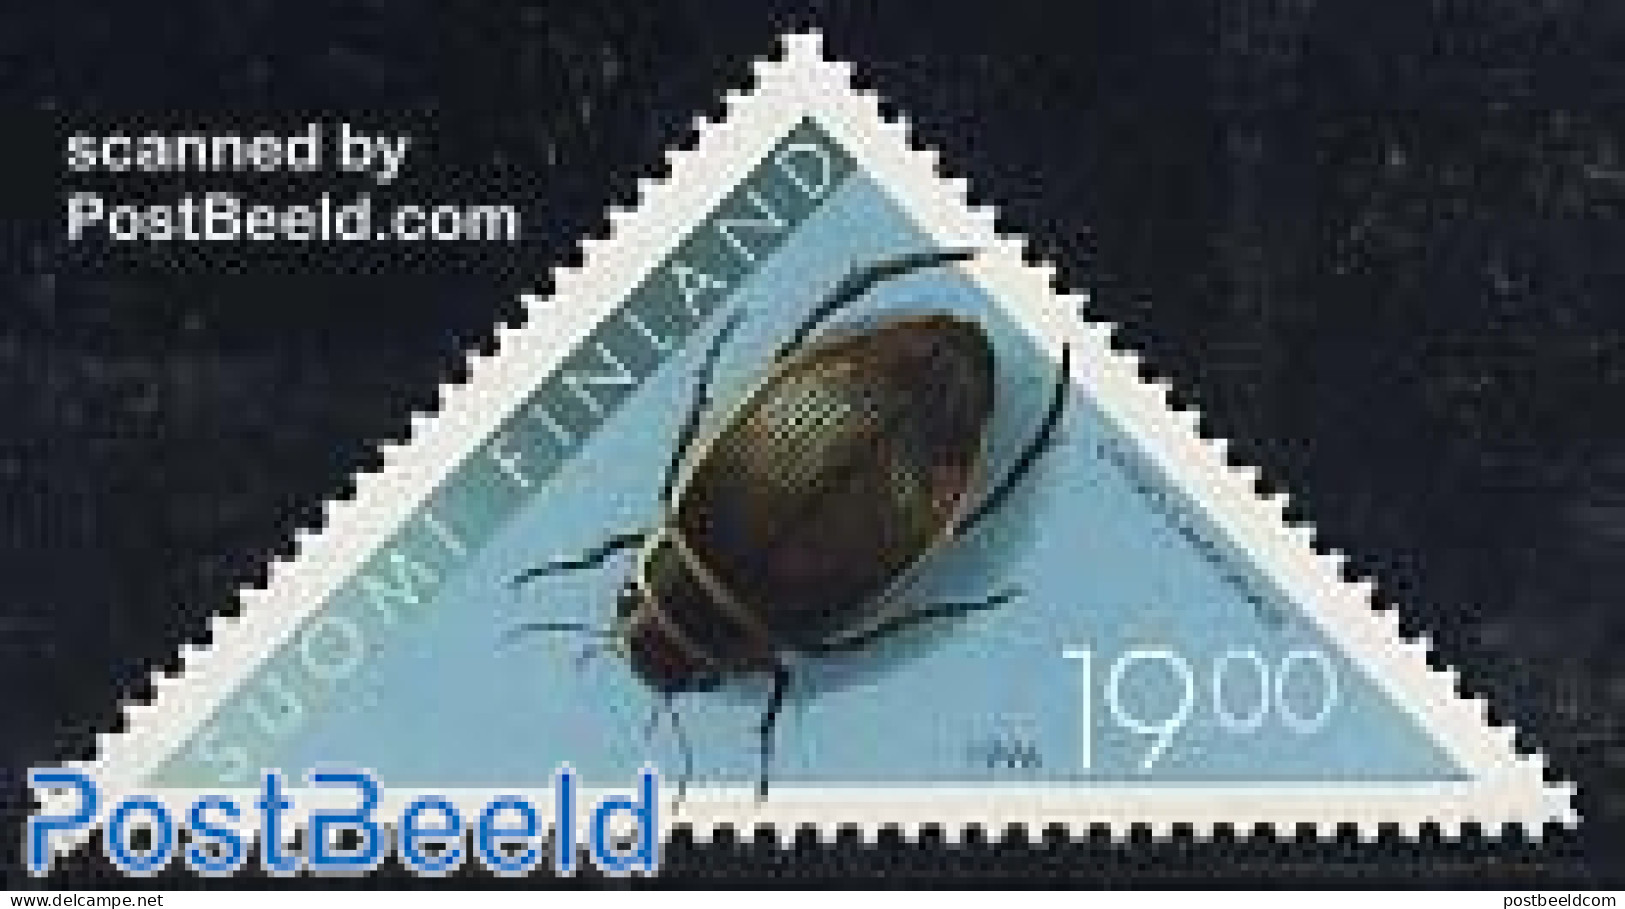 Finland 1996 Insects 1v, Mint NH, Nature - Insects - Neufs